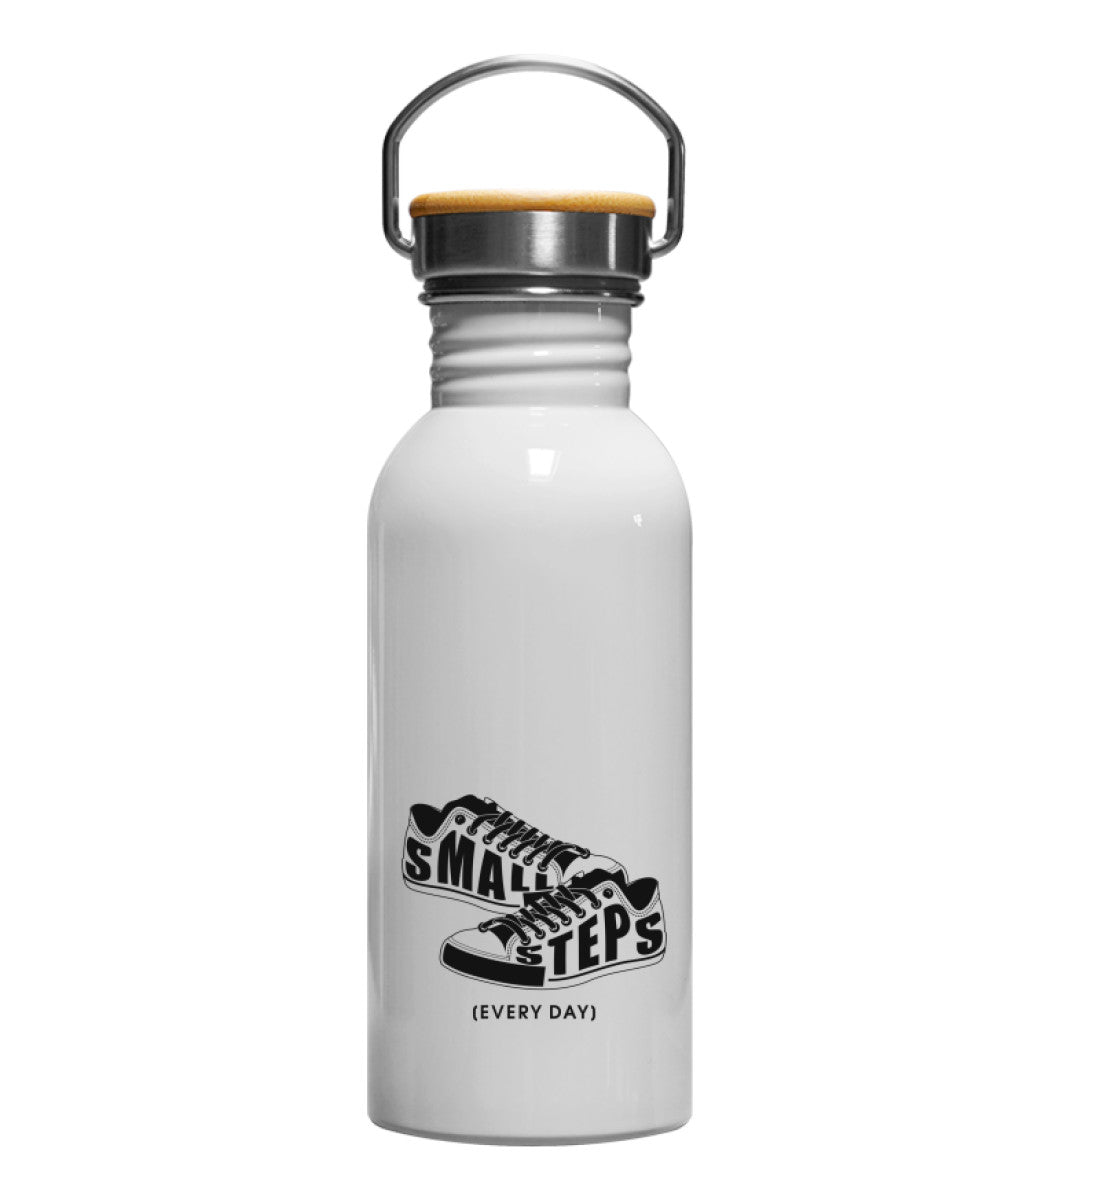 Edelstahl-Trinkflasche "SMALL STEPS every day" mit Sneakers-Grafik